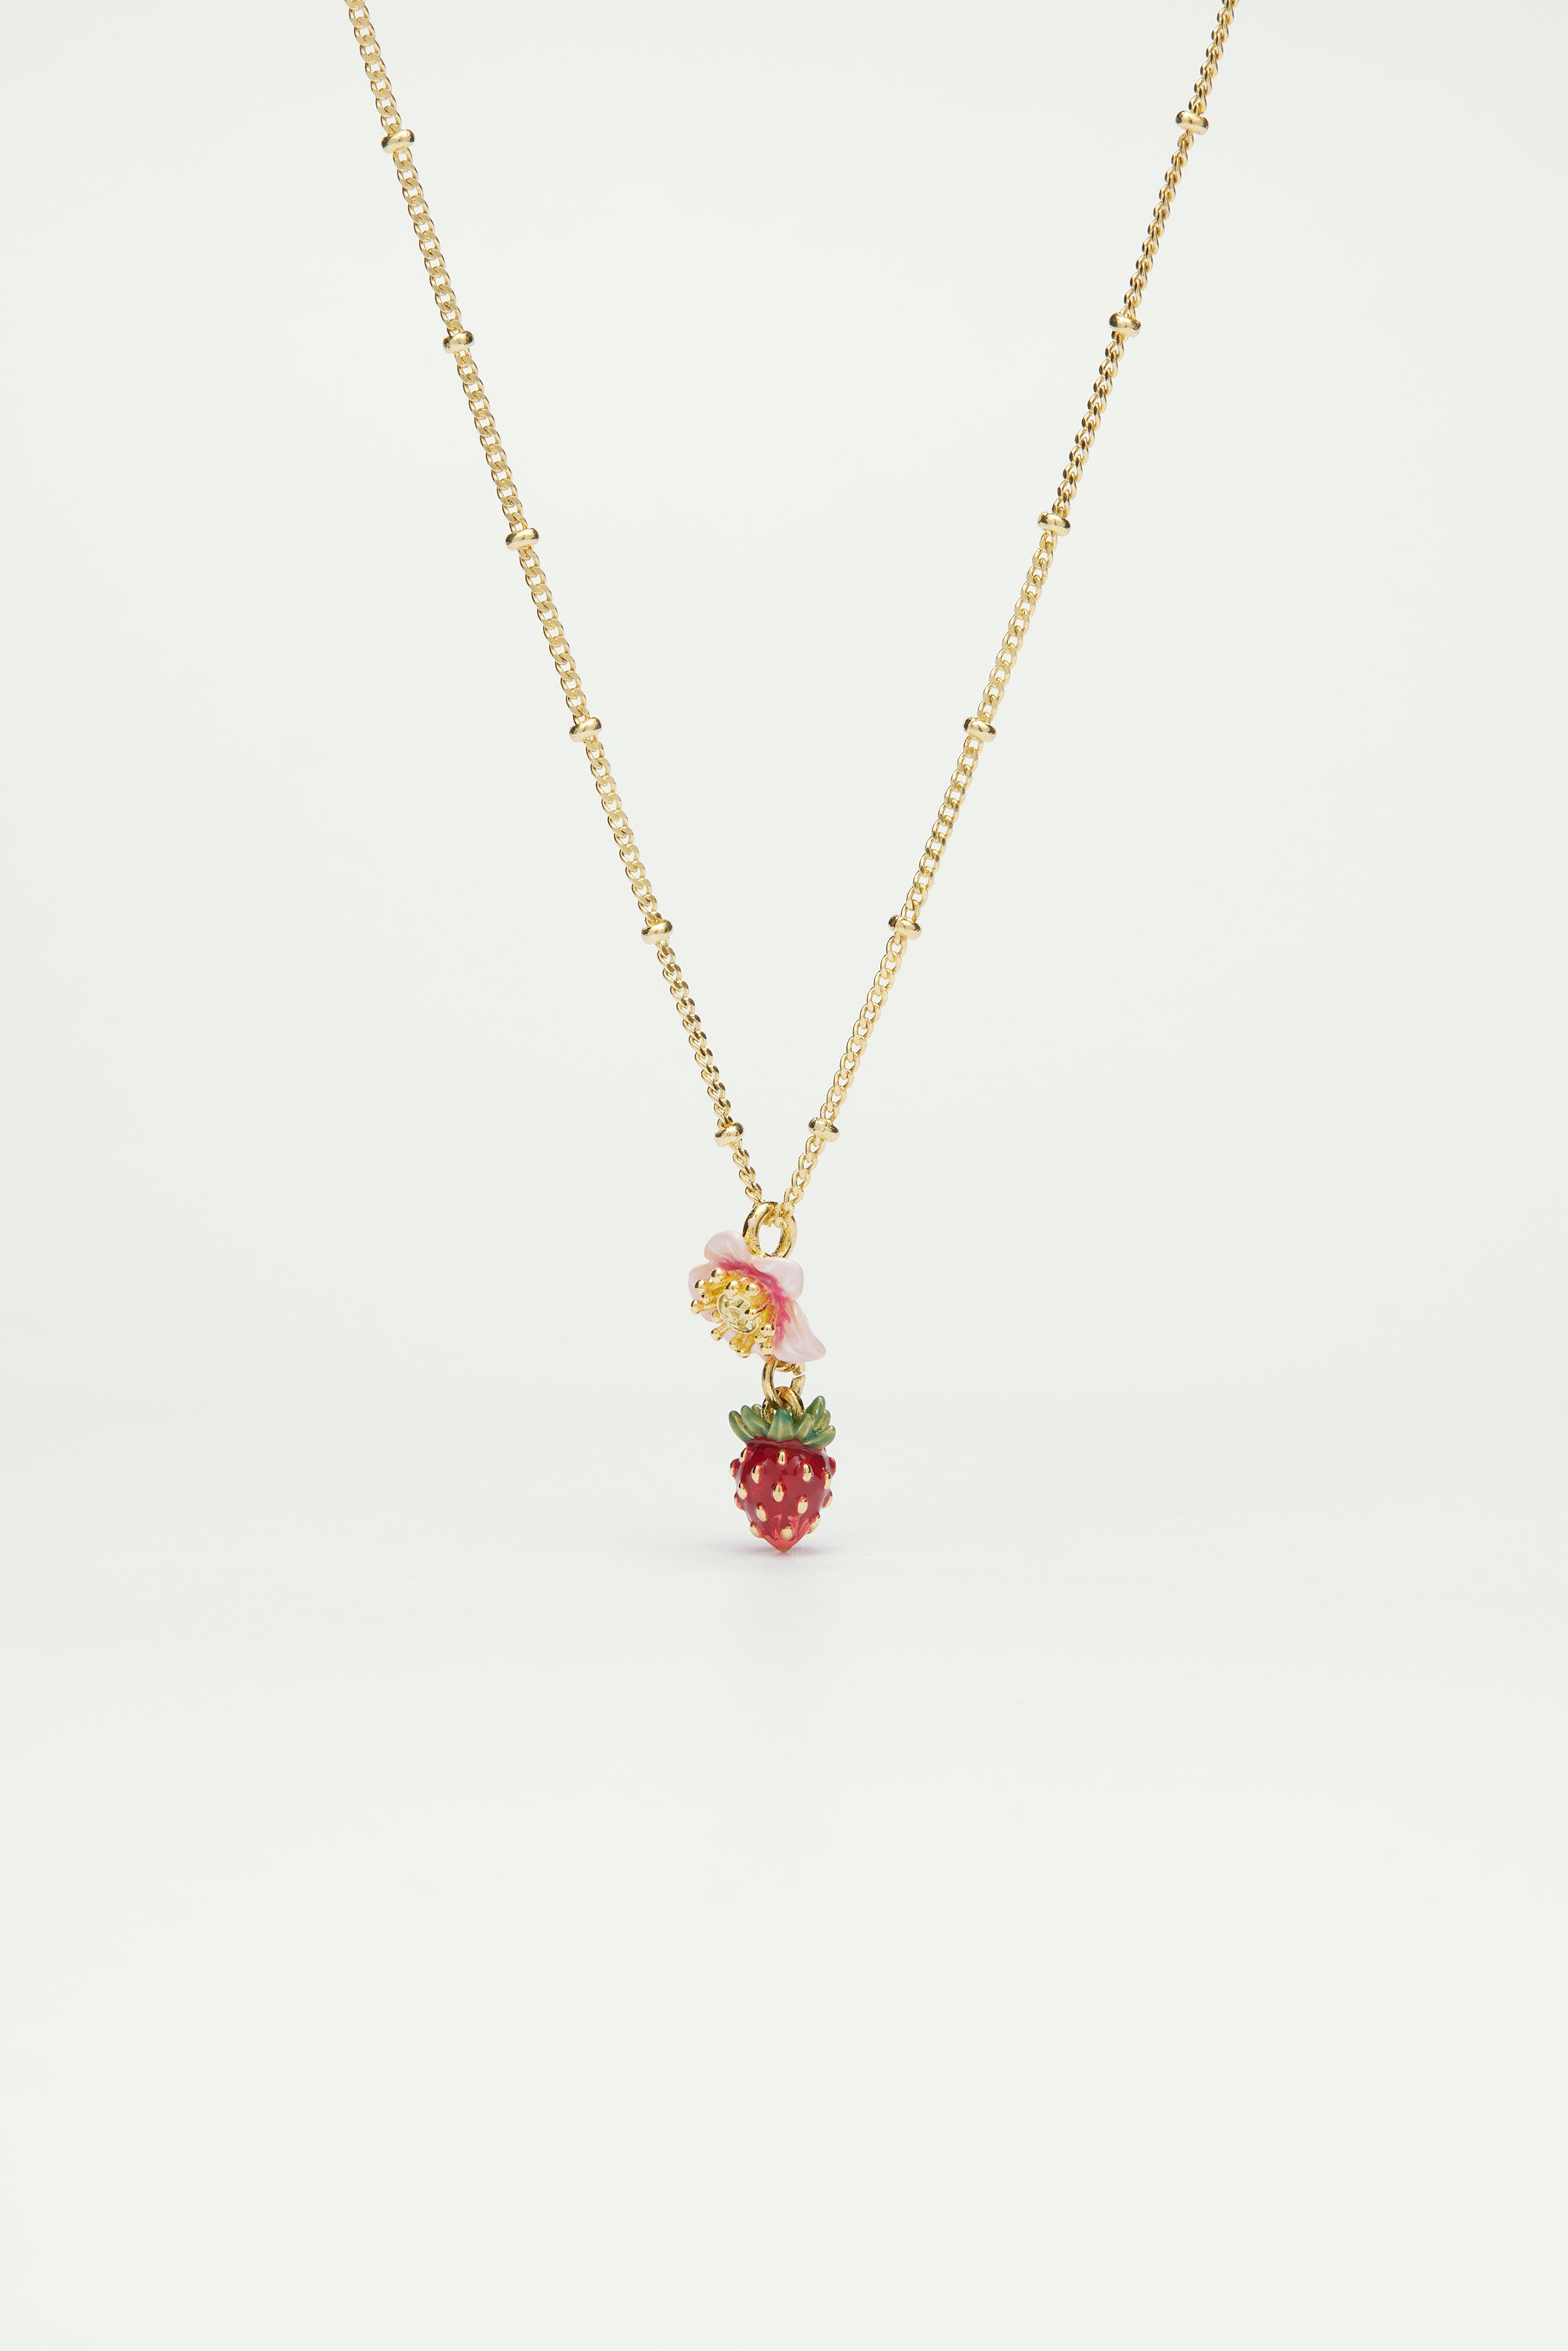 Wild strawberry and pink flower pendant necklace